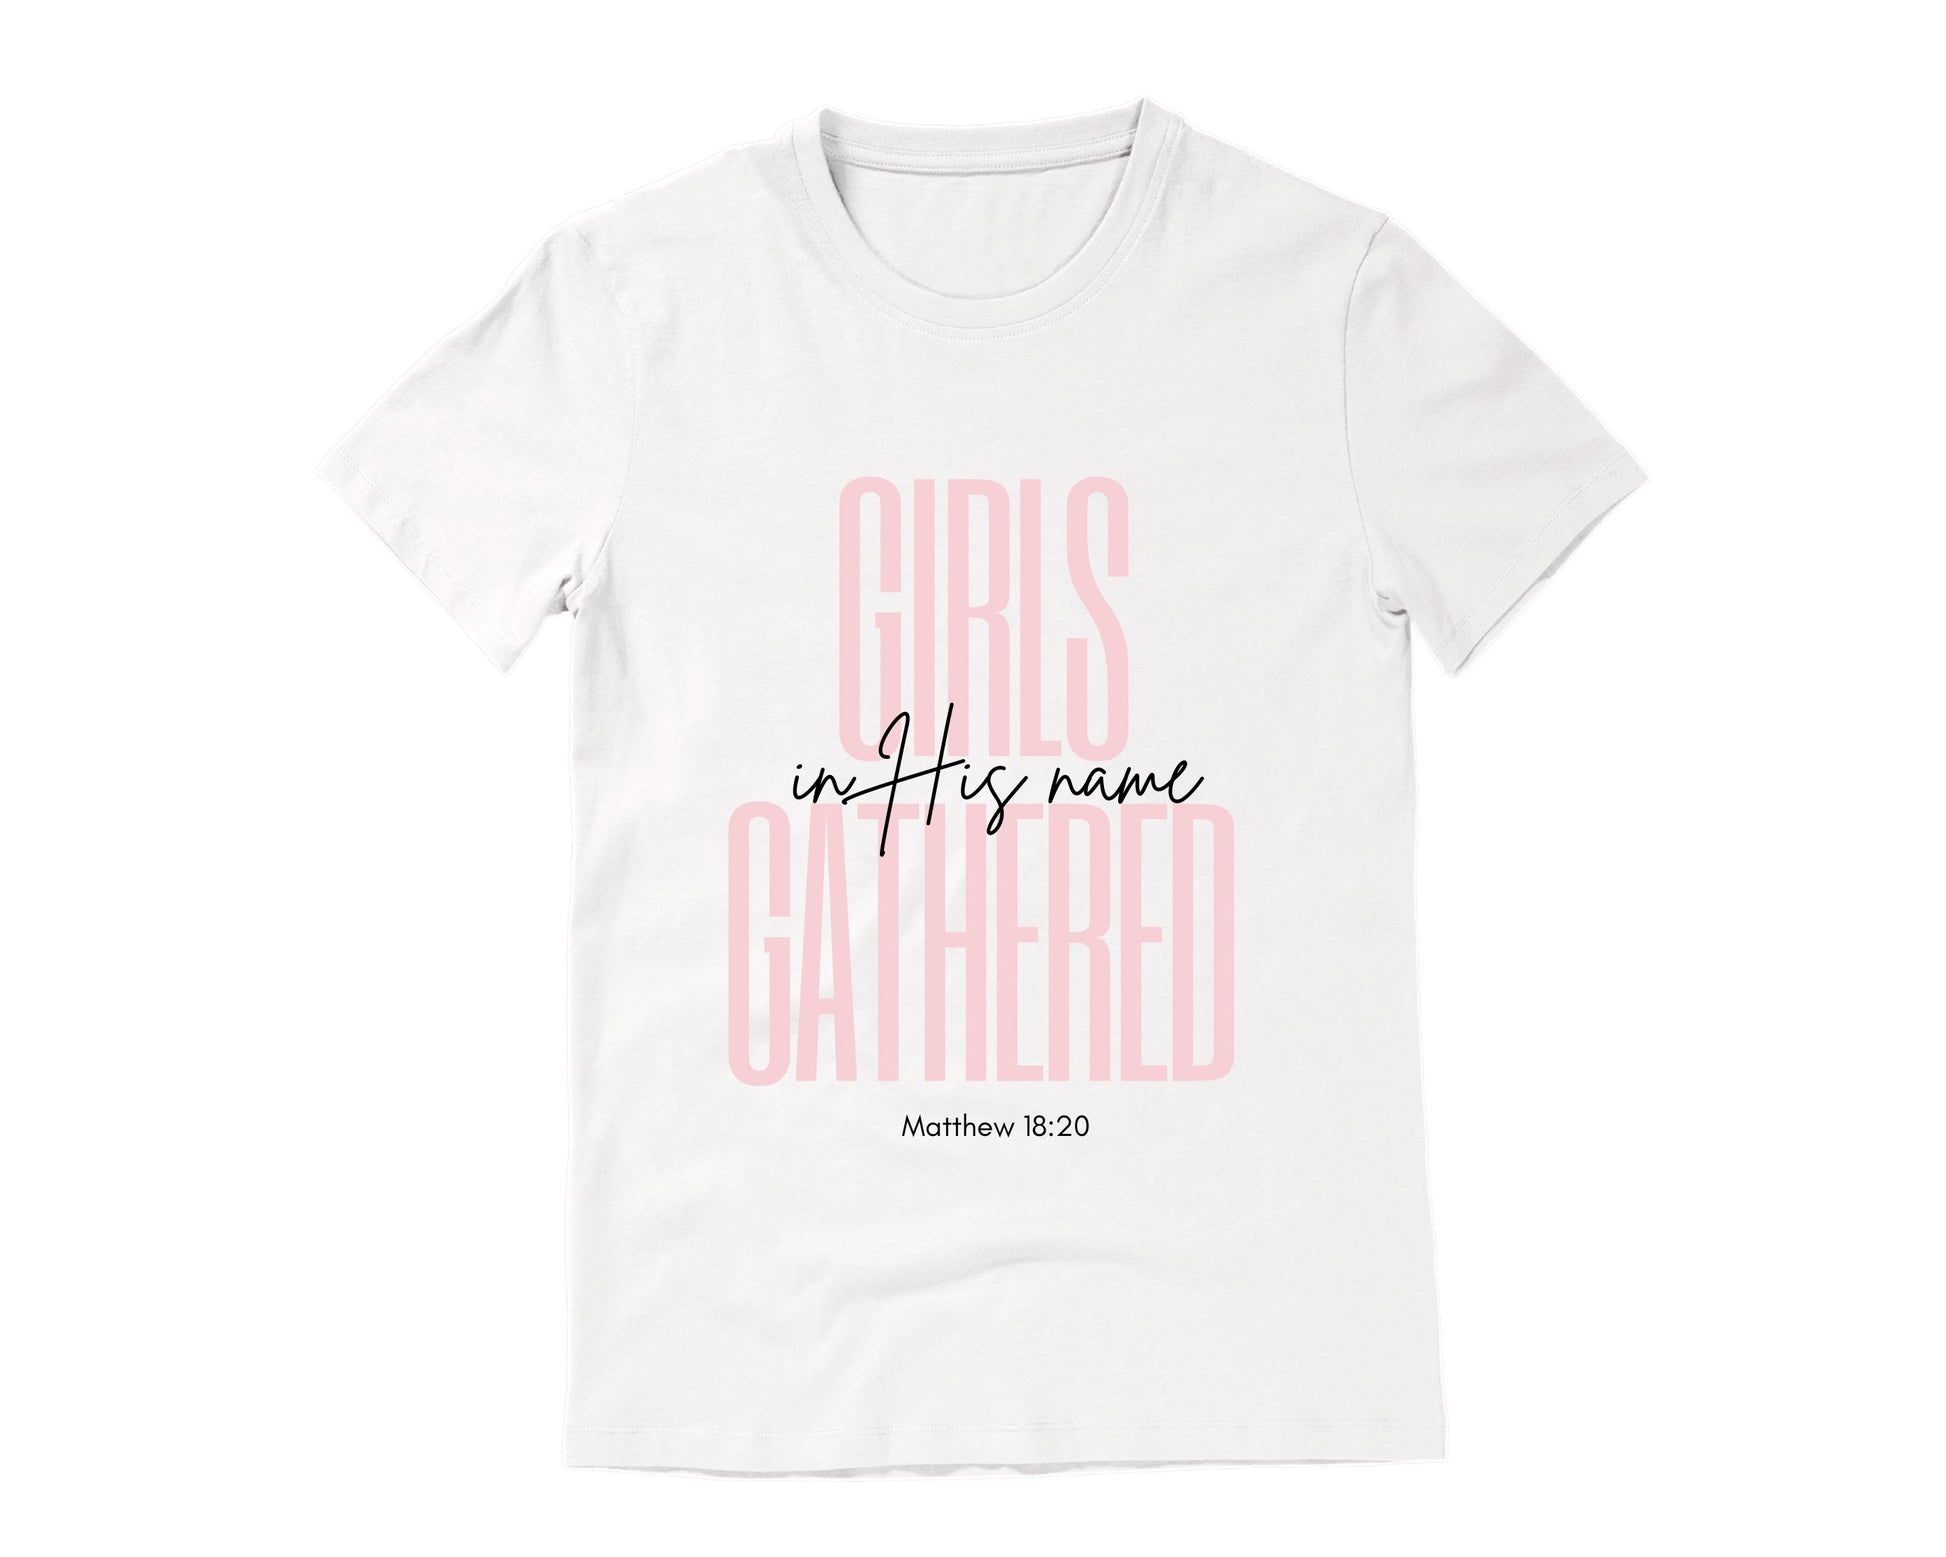 Christian girl's T-Shirt for Small Groups in white.